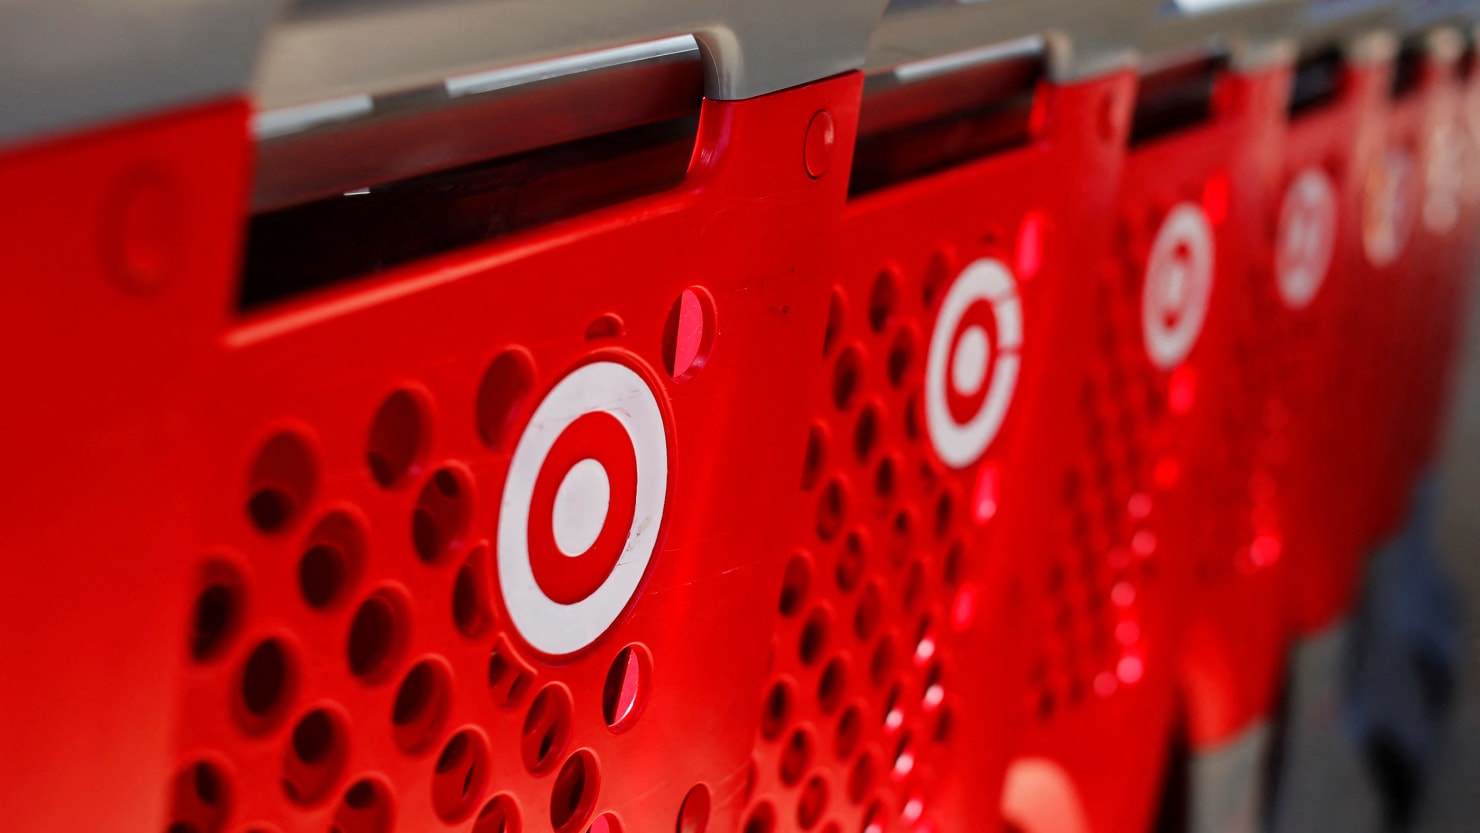 Rightwing group takes aim at Target for offering Pride-themed